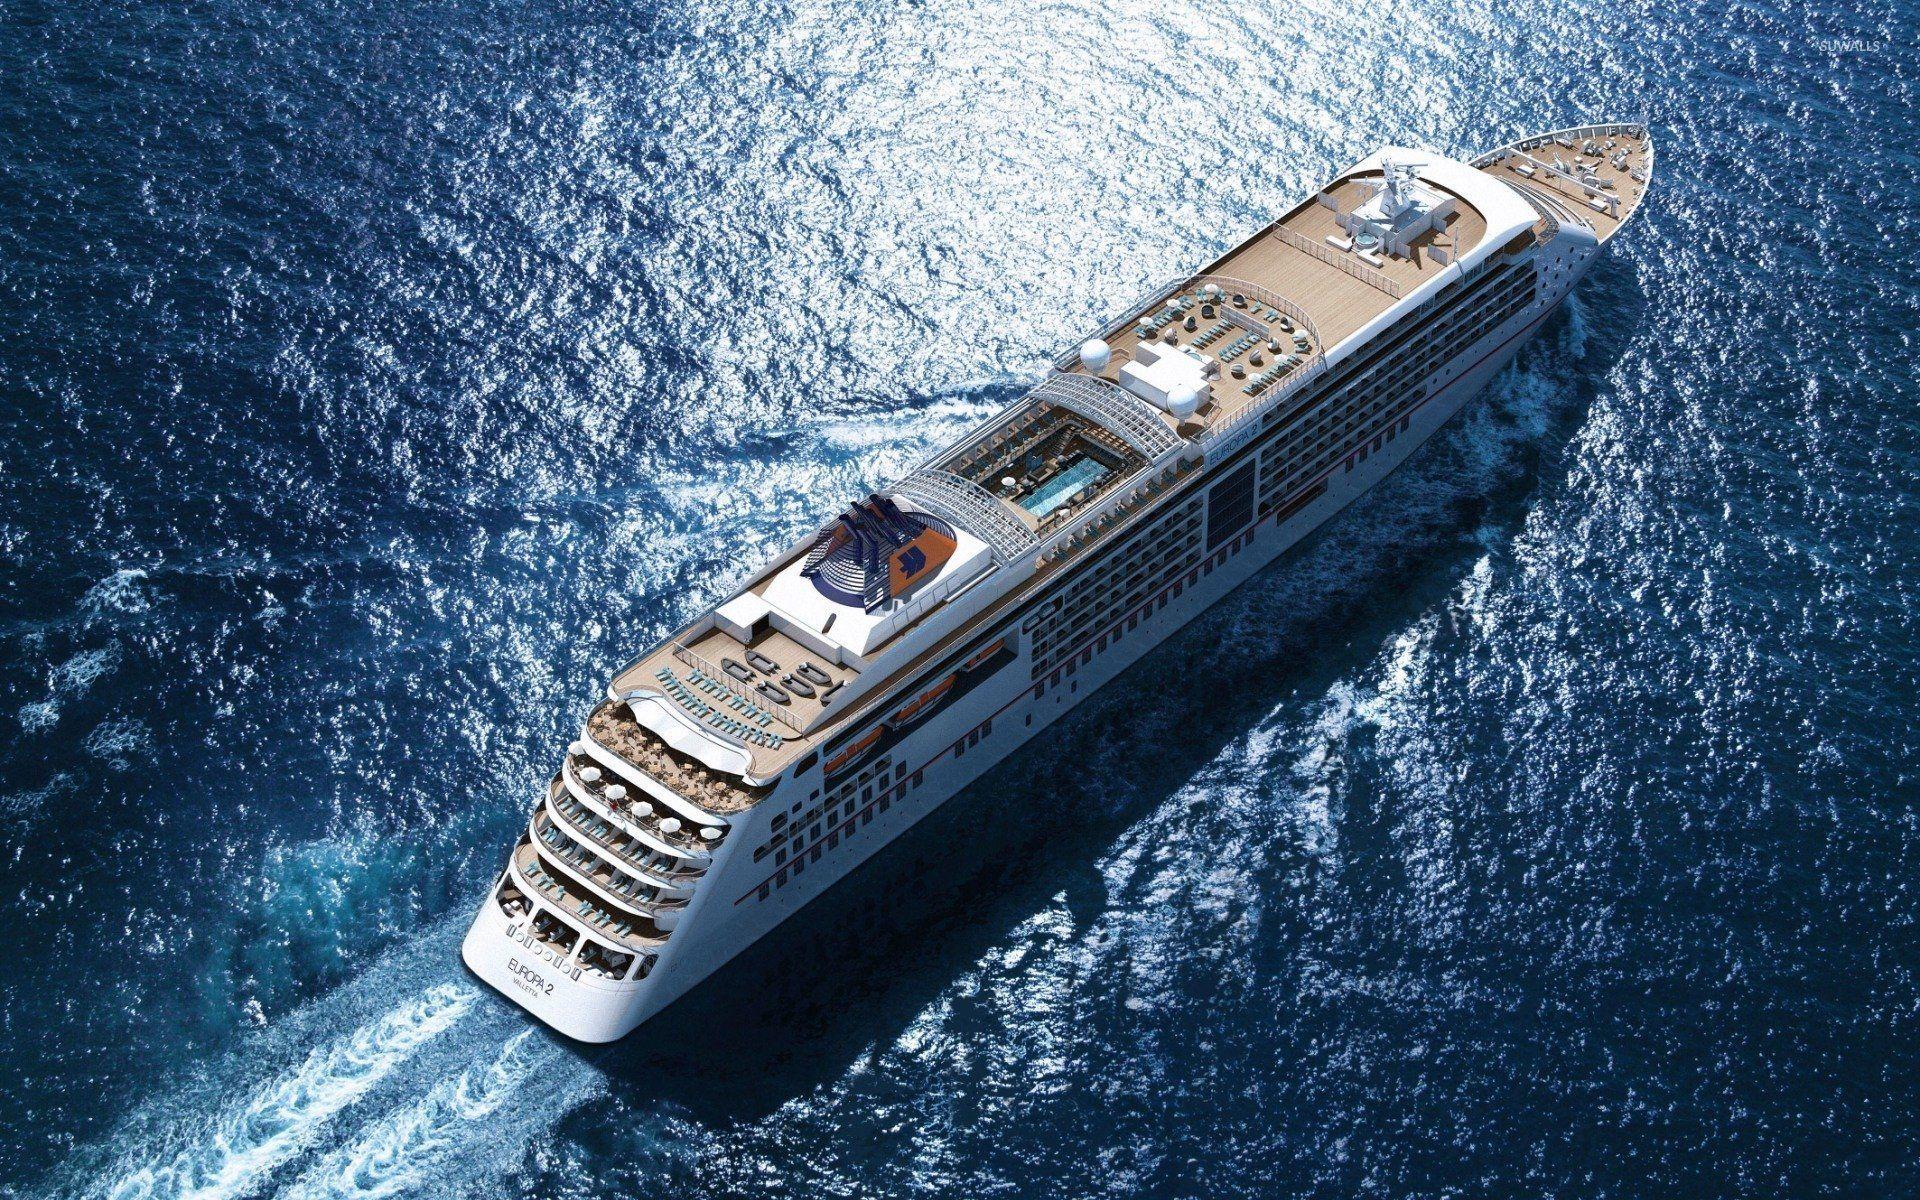 Top view of the MS Europa 2 wallpaper wallpaper